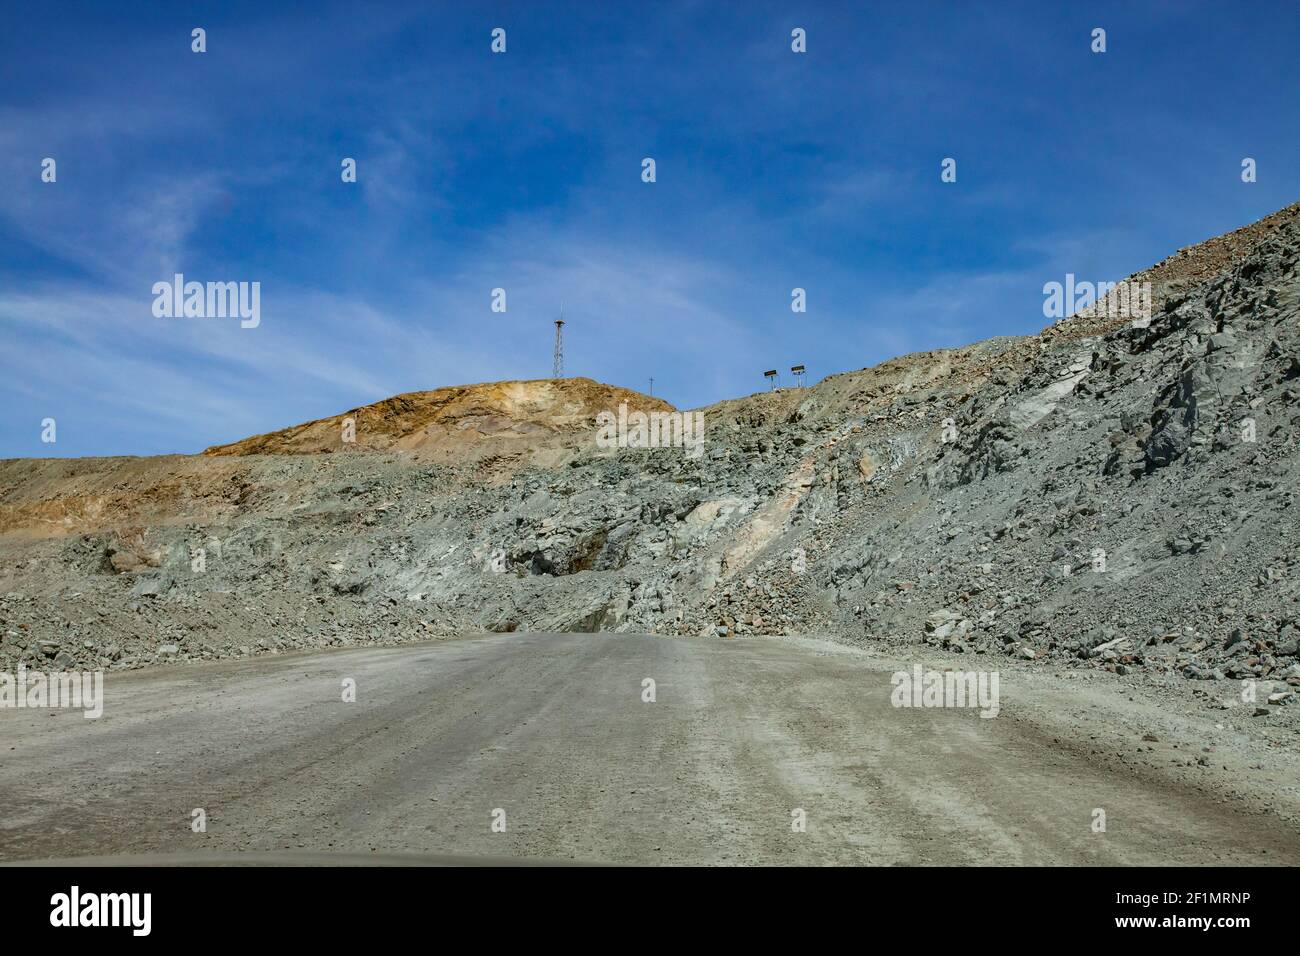 Copper ore open-pit mining. Quarry panorama. Green ground, gravel road on blue sky background. Communication tower and lighting mast. Stock Photo